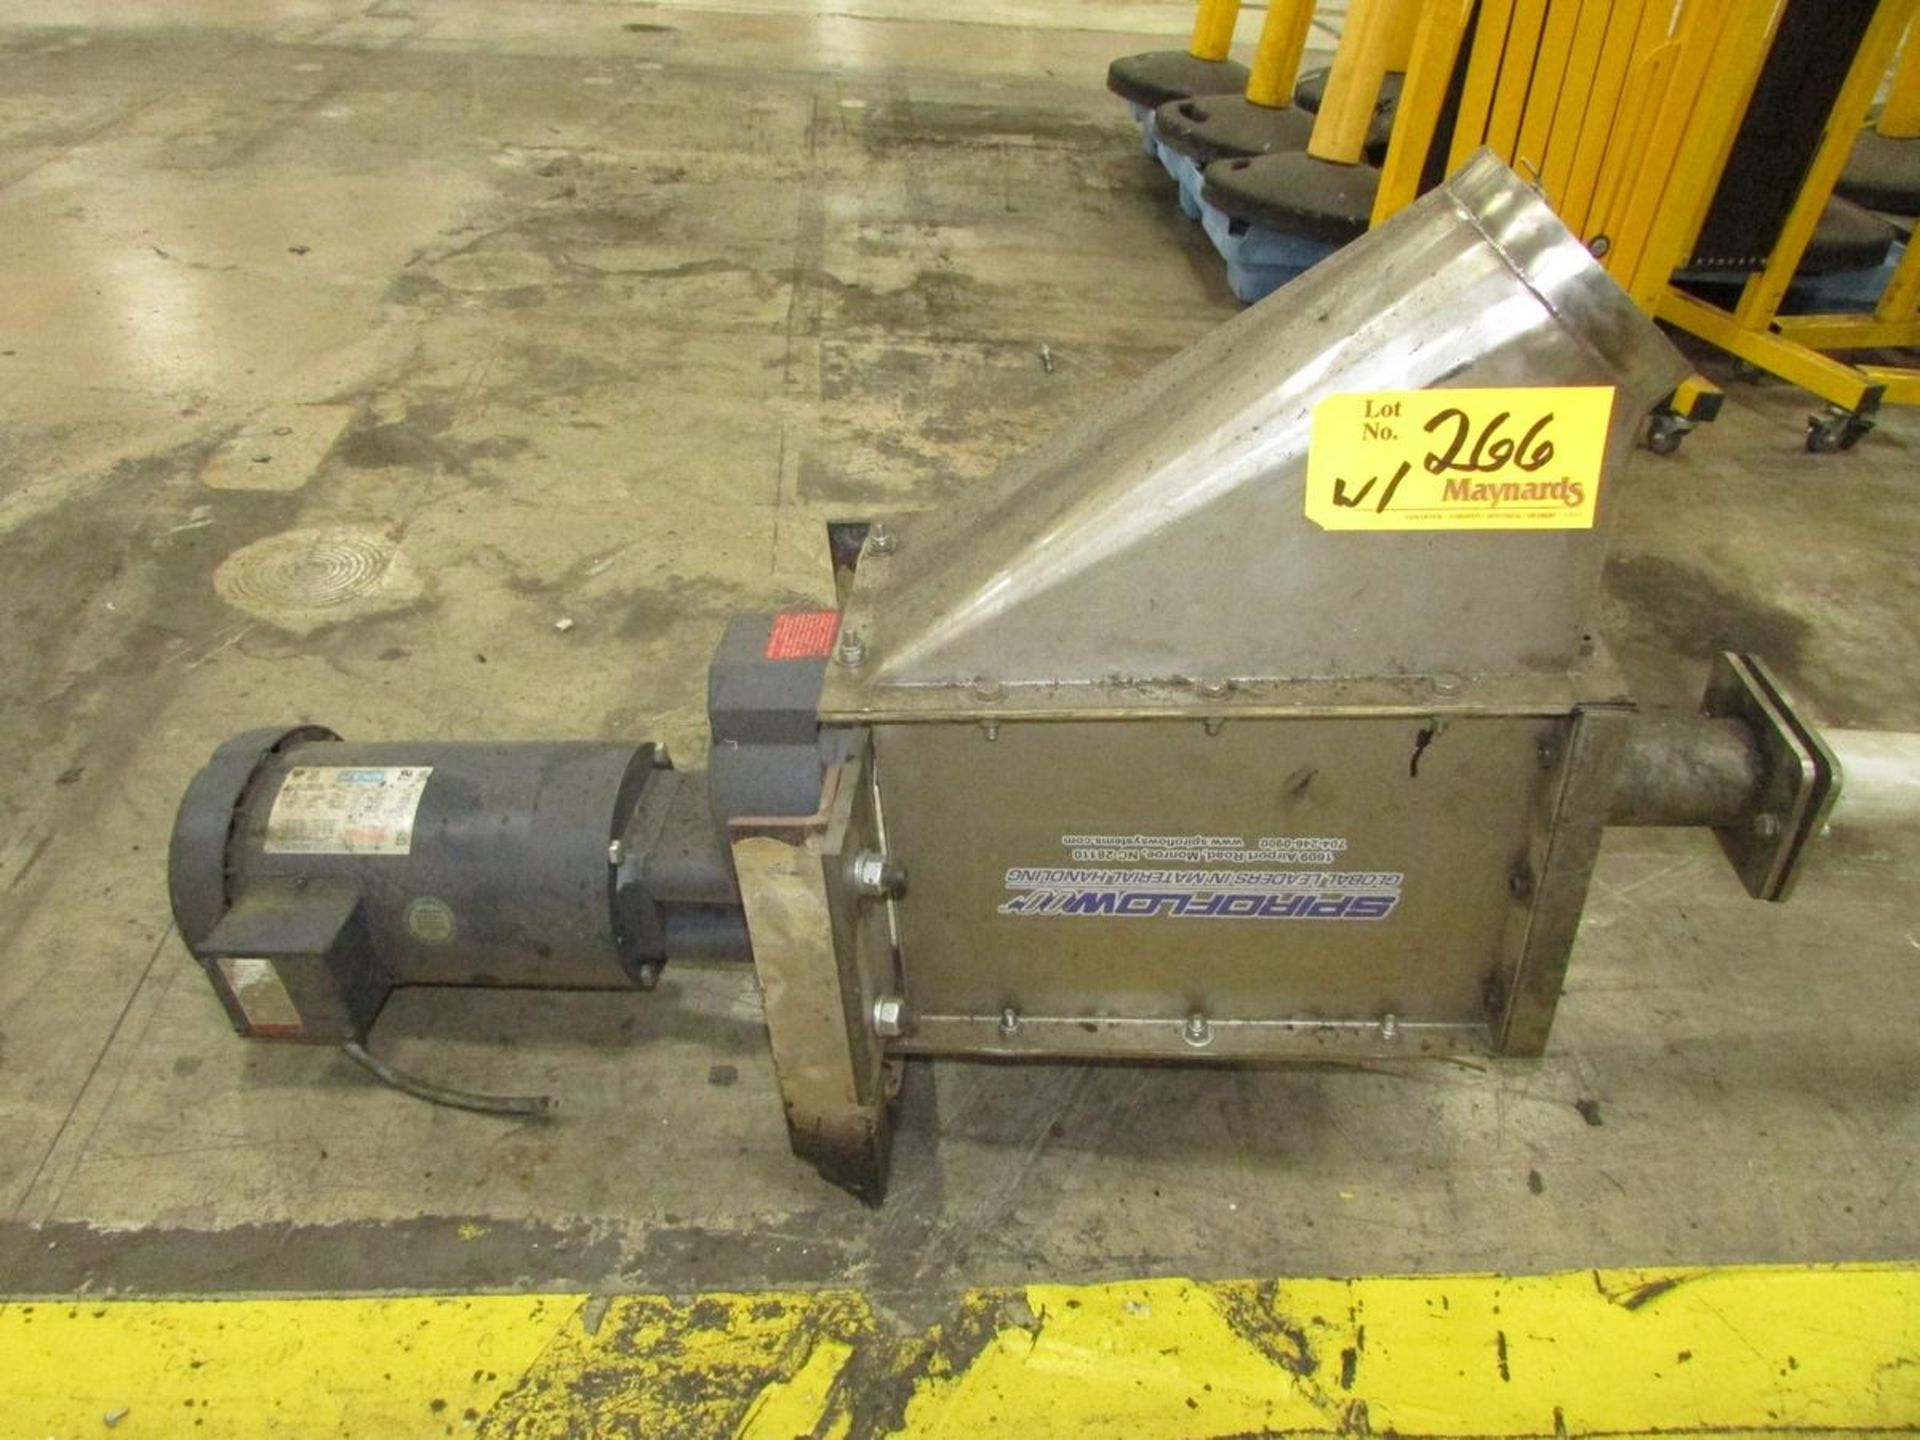 SpiroFlow Rolling Bottom Discharge Material Feed Hopper - Image 6 of 7